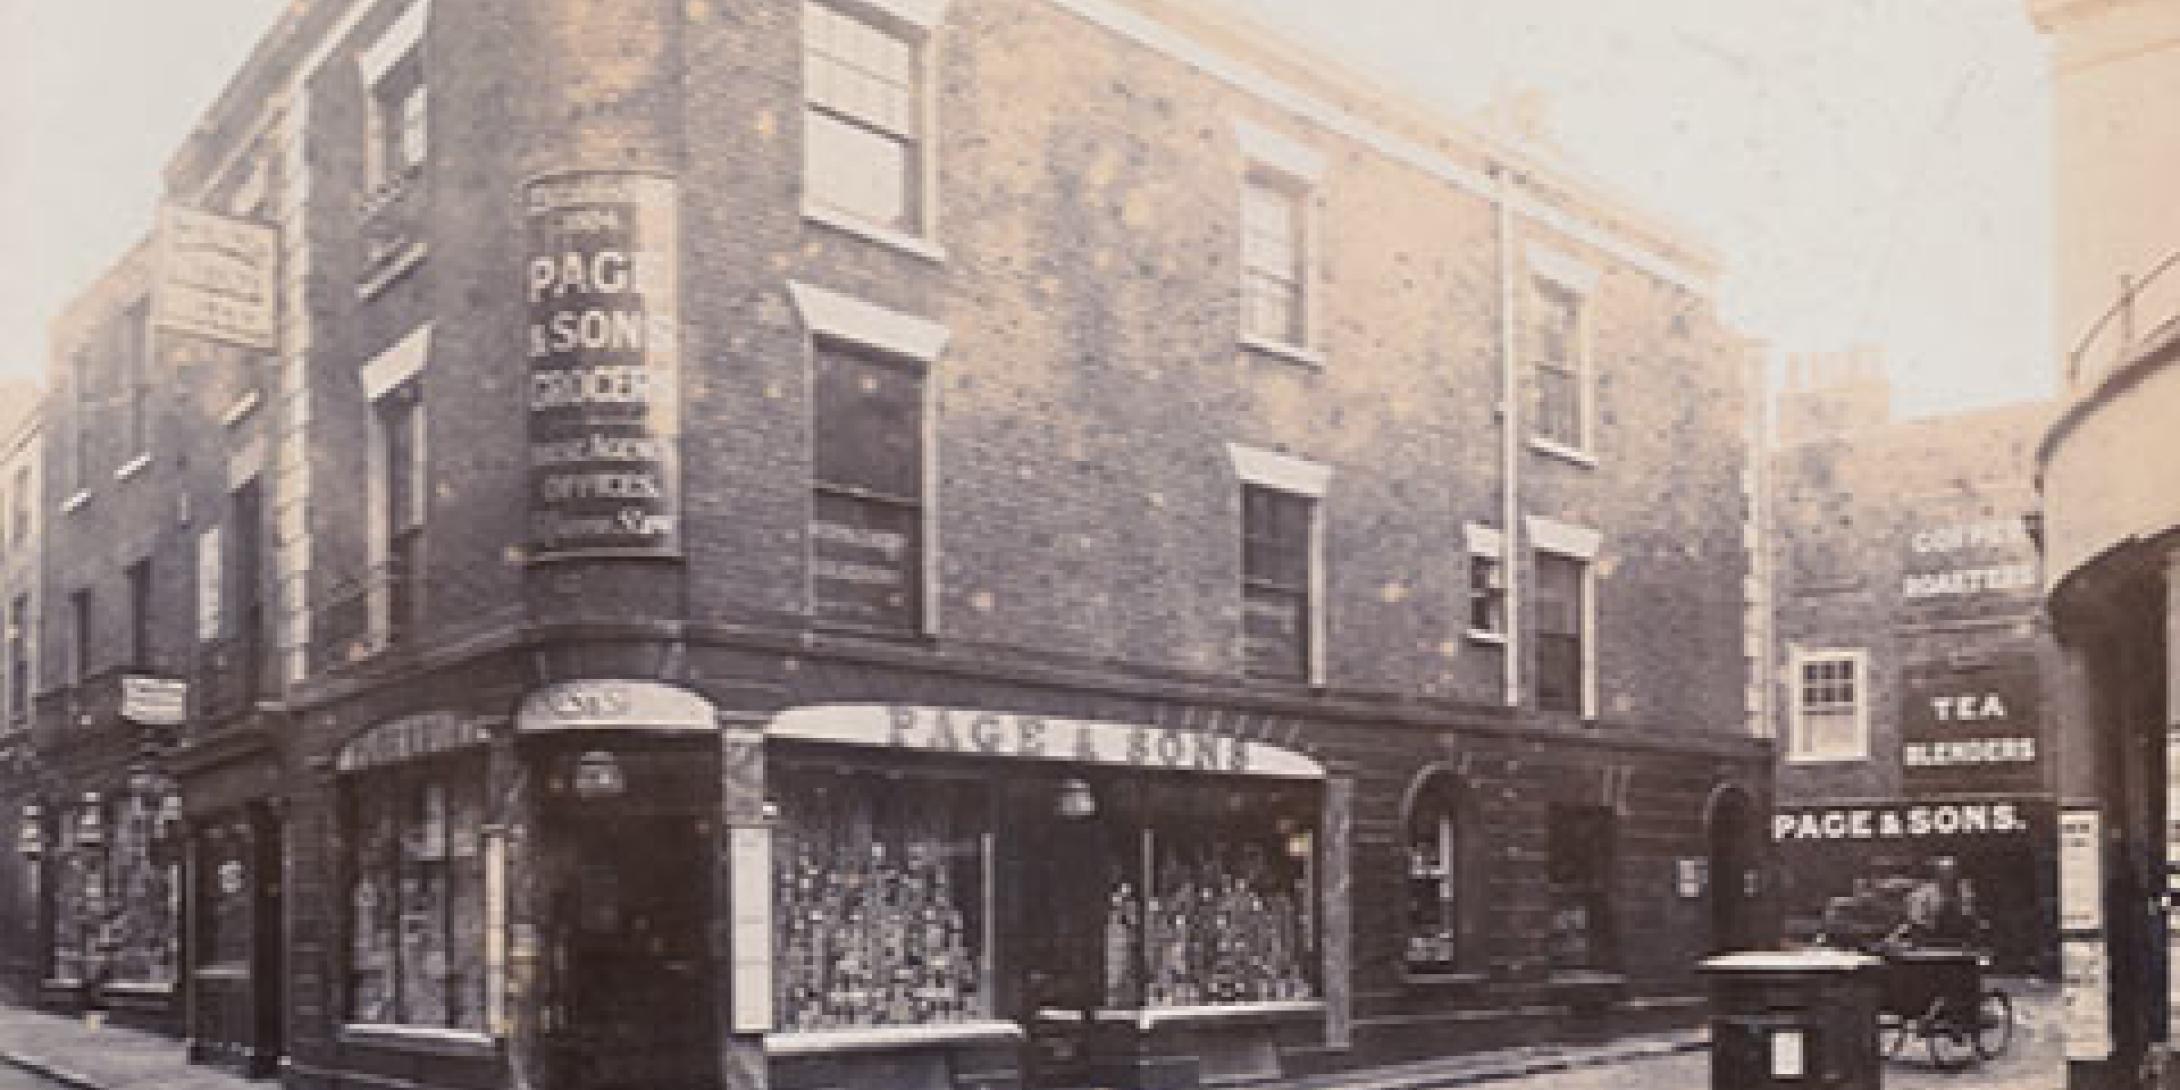 Black and white photo of Page & Sons shop front from the 1800s